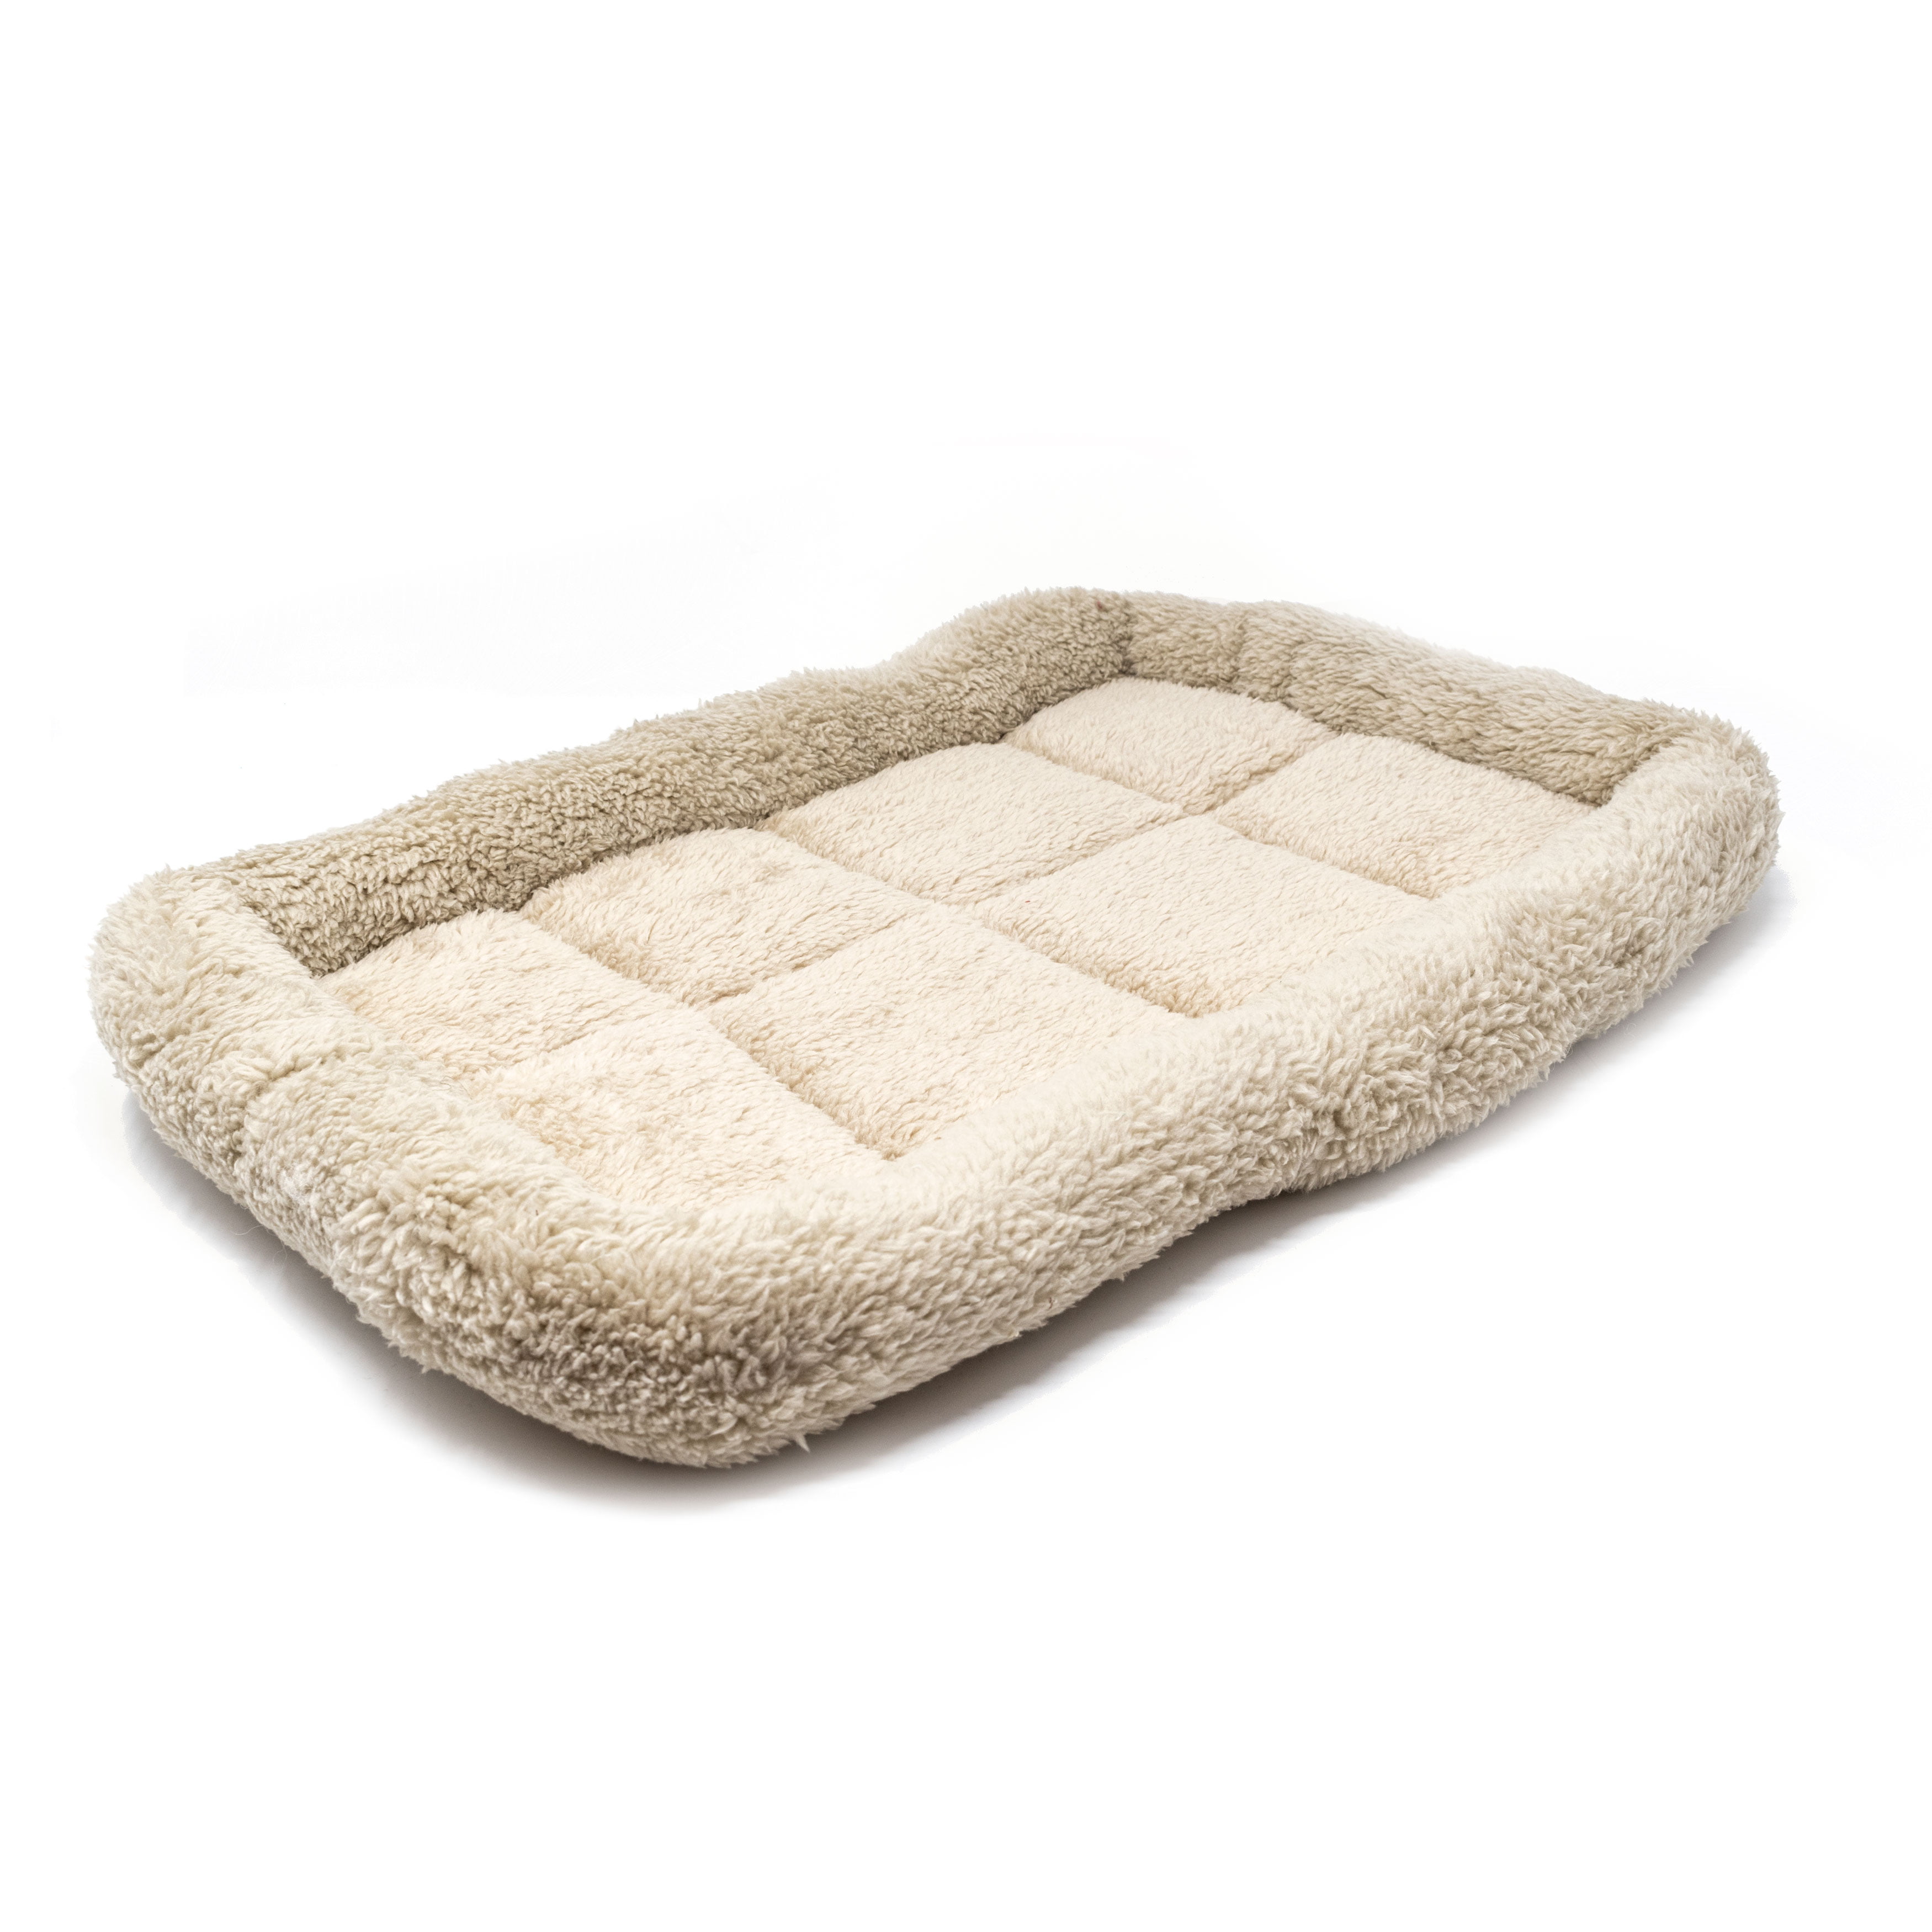 ALEKO Small Soft Plush Beige Comfy Pet Bed Cushion Mat for Dogs and Cats,  16